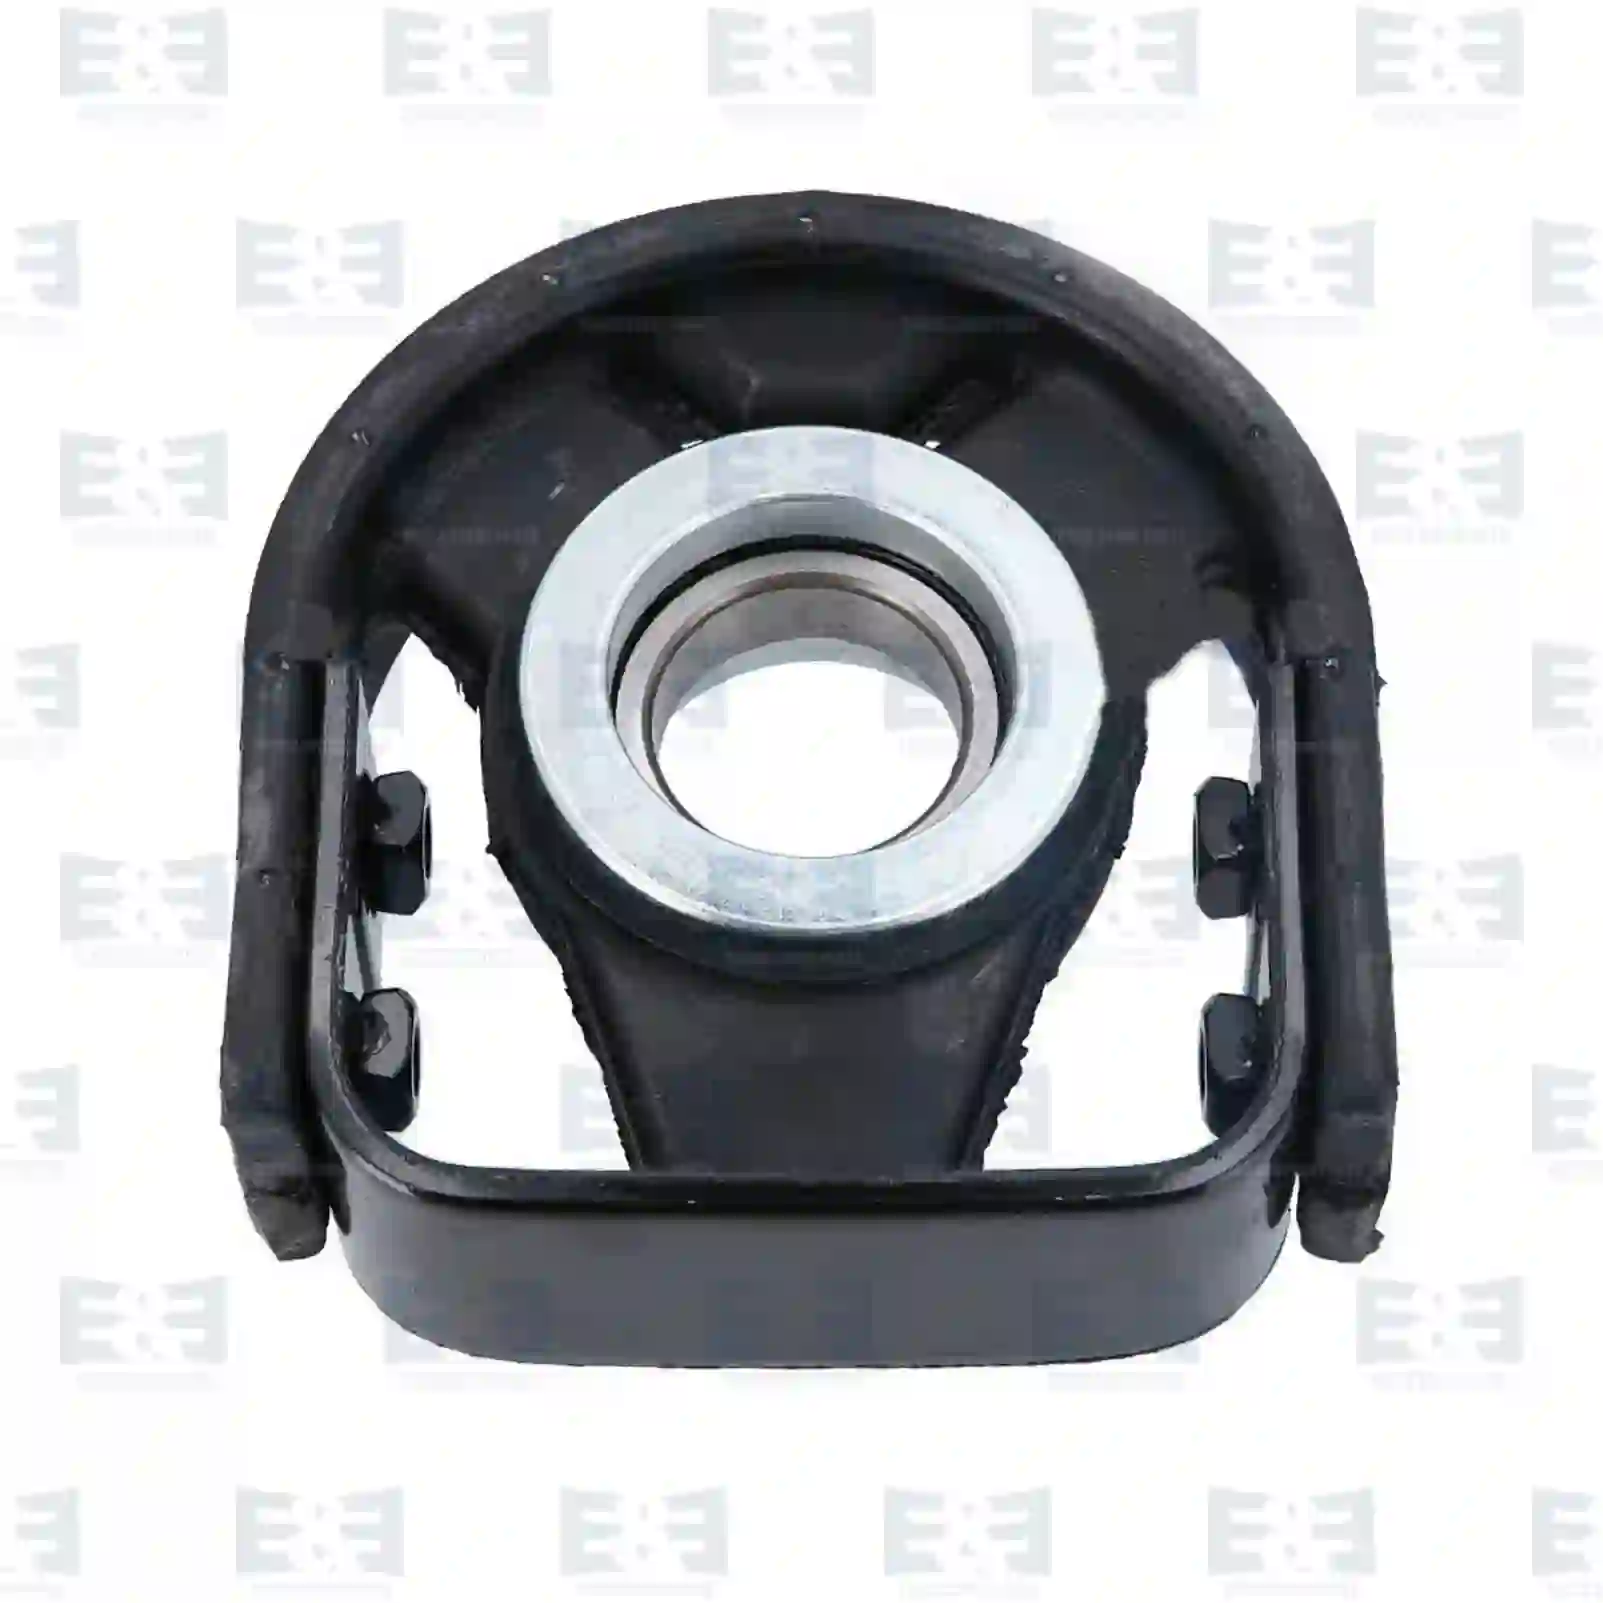 Support Bearing Center bearing, EE No 2E2276915 ,  oem no:0004110212, 9704110012, 9704110112, ZG02487-0008 E&E Truck Spare Parts | Truck Spare Parts, Auotomotive Spare Parts